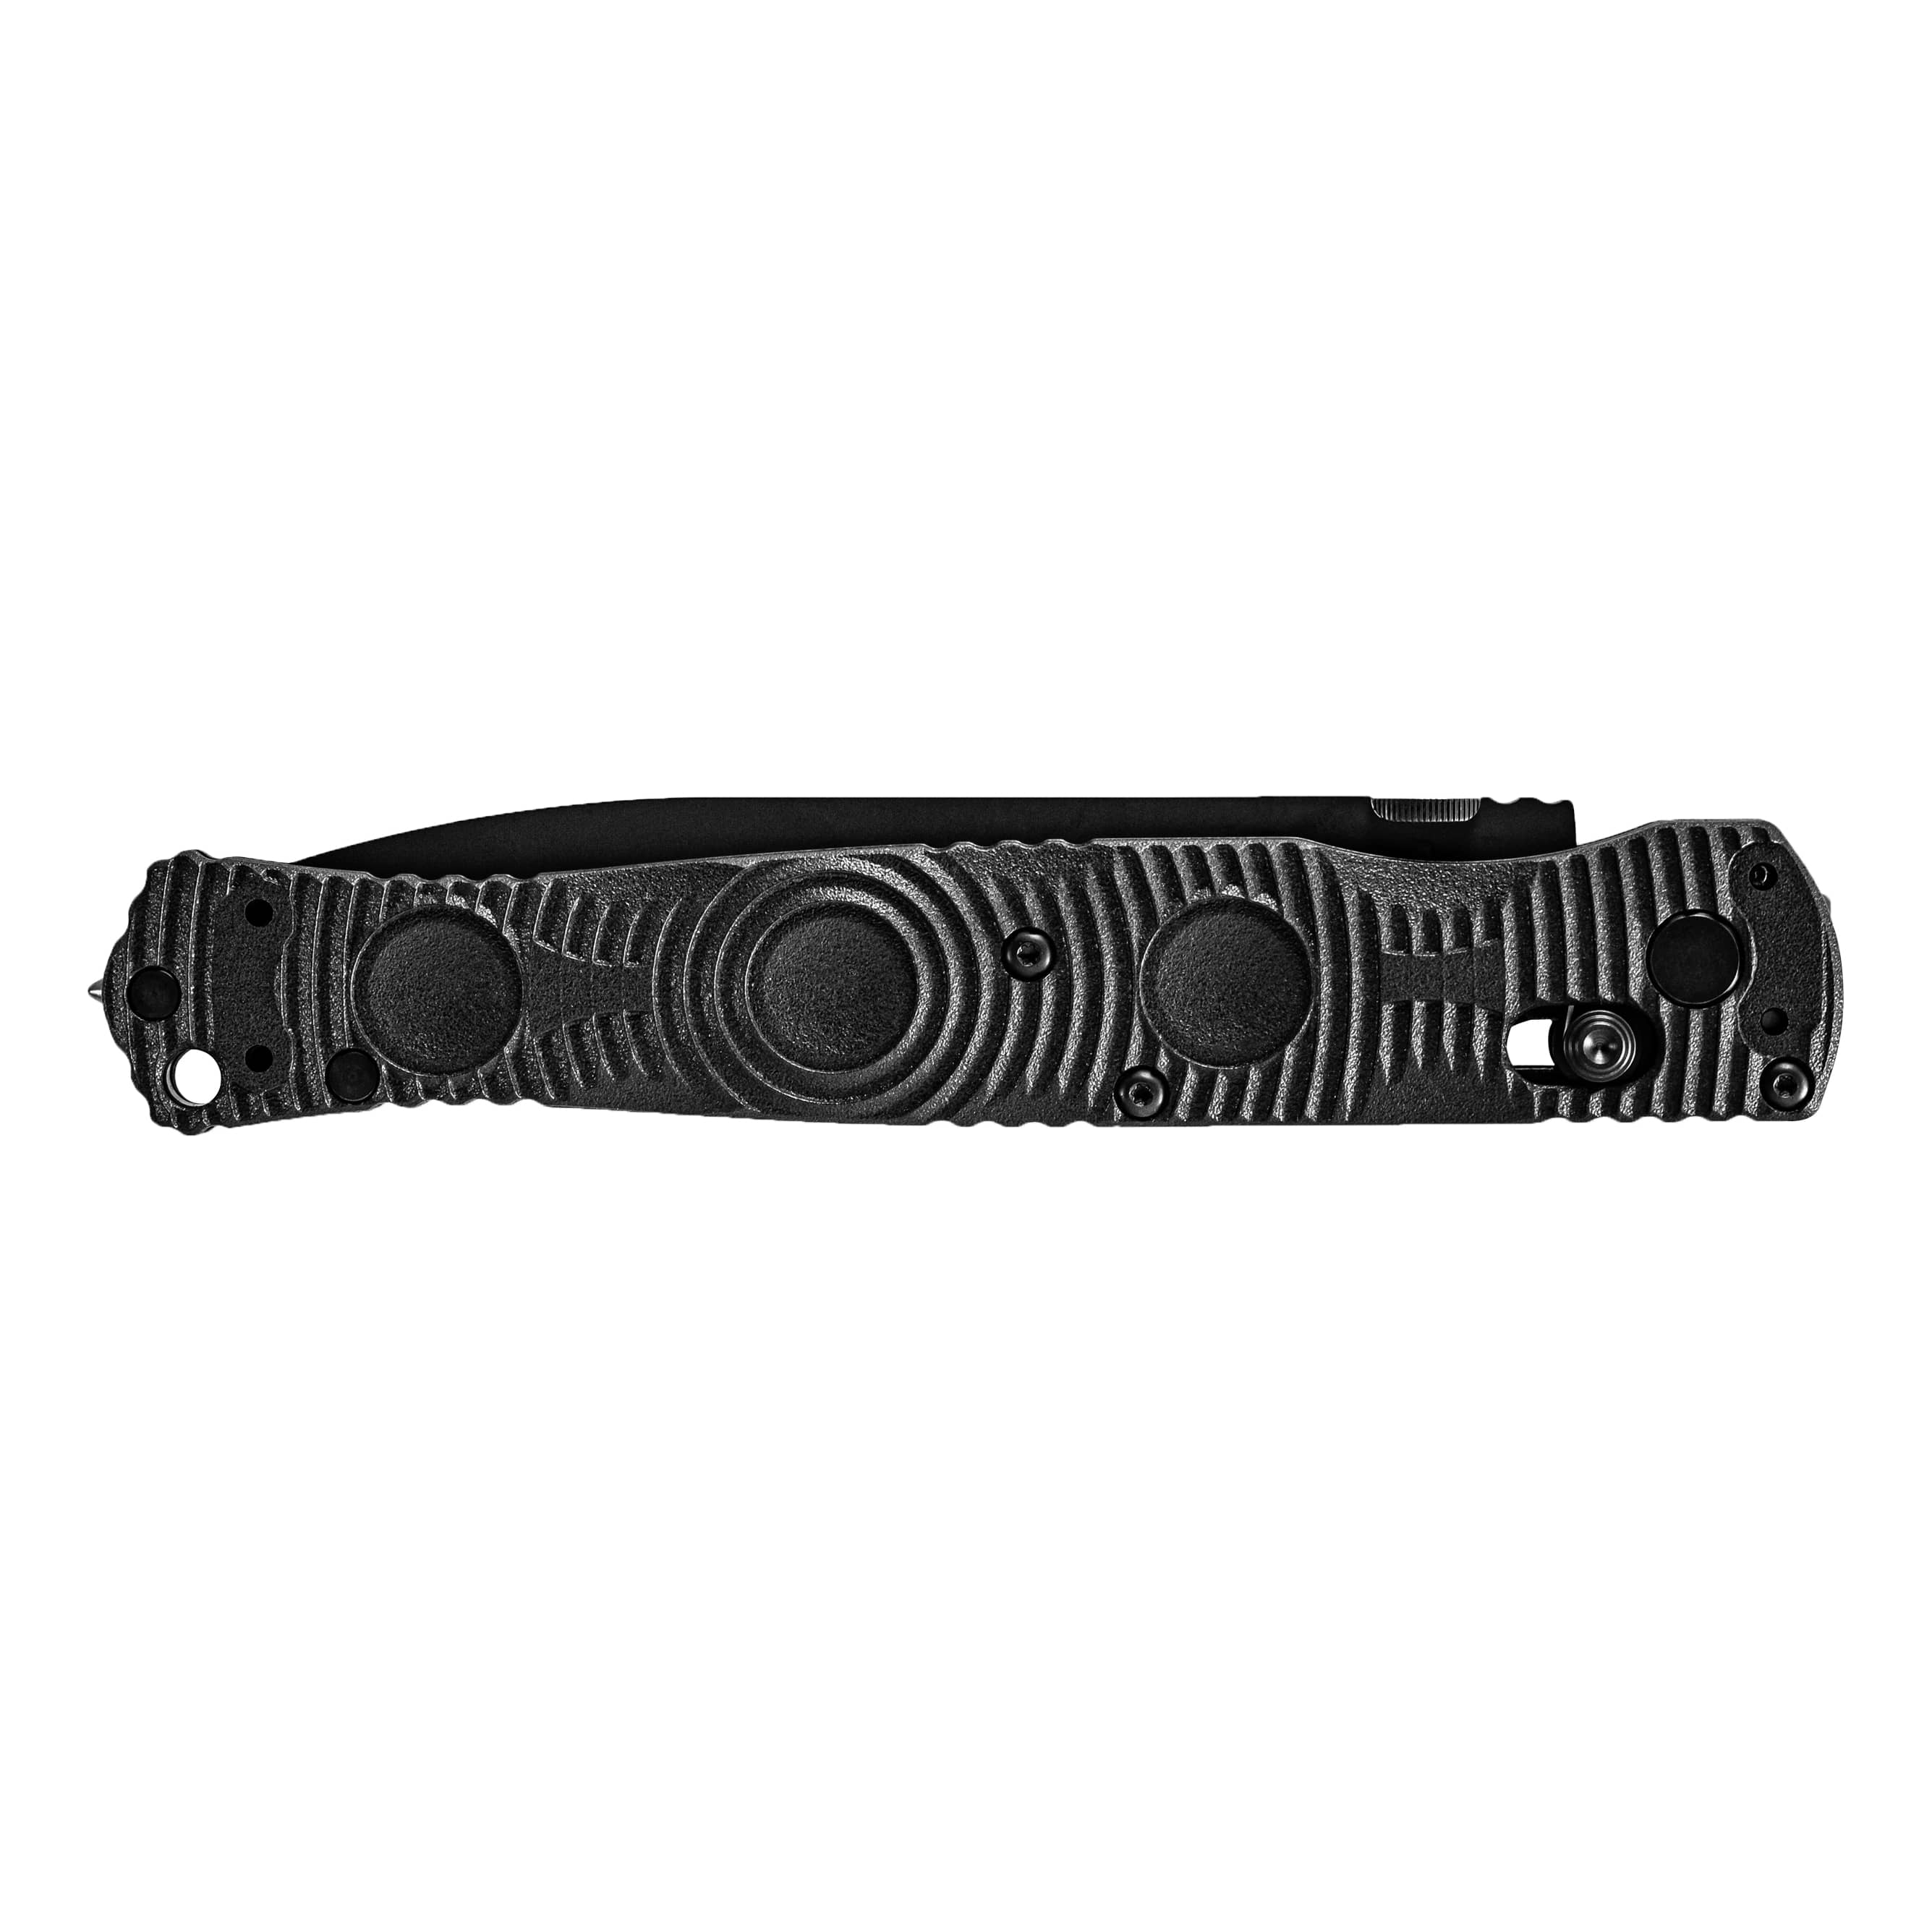 Benchmade® 391SBK SOCP Tactical Folding Knife - Closed View